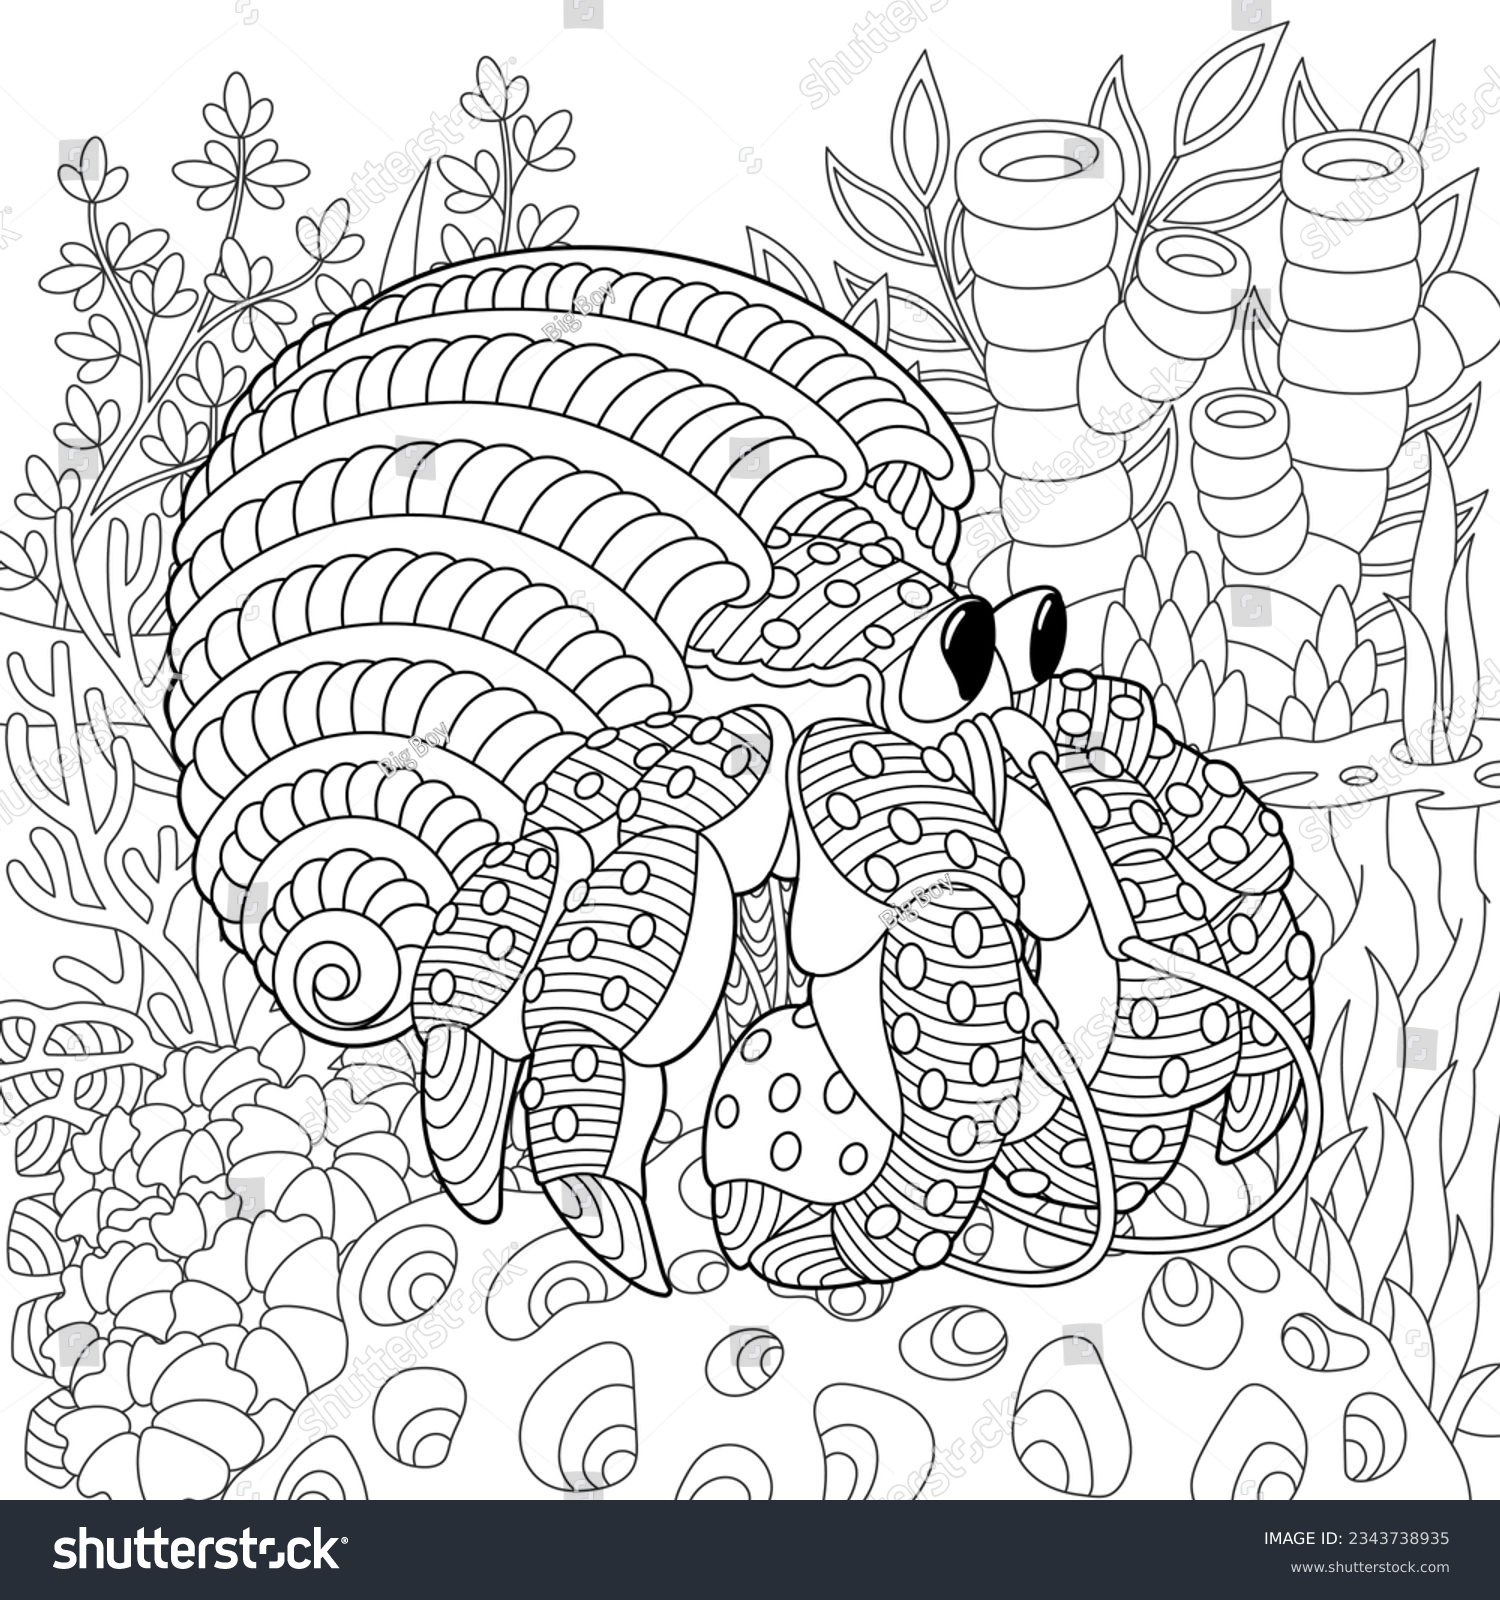 Hermit crab coloring page underwater colouring stock vector royalty free